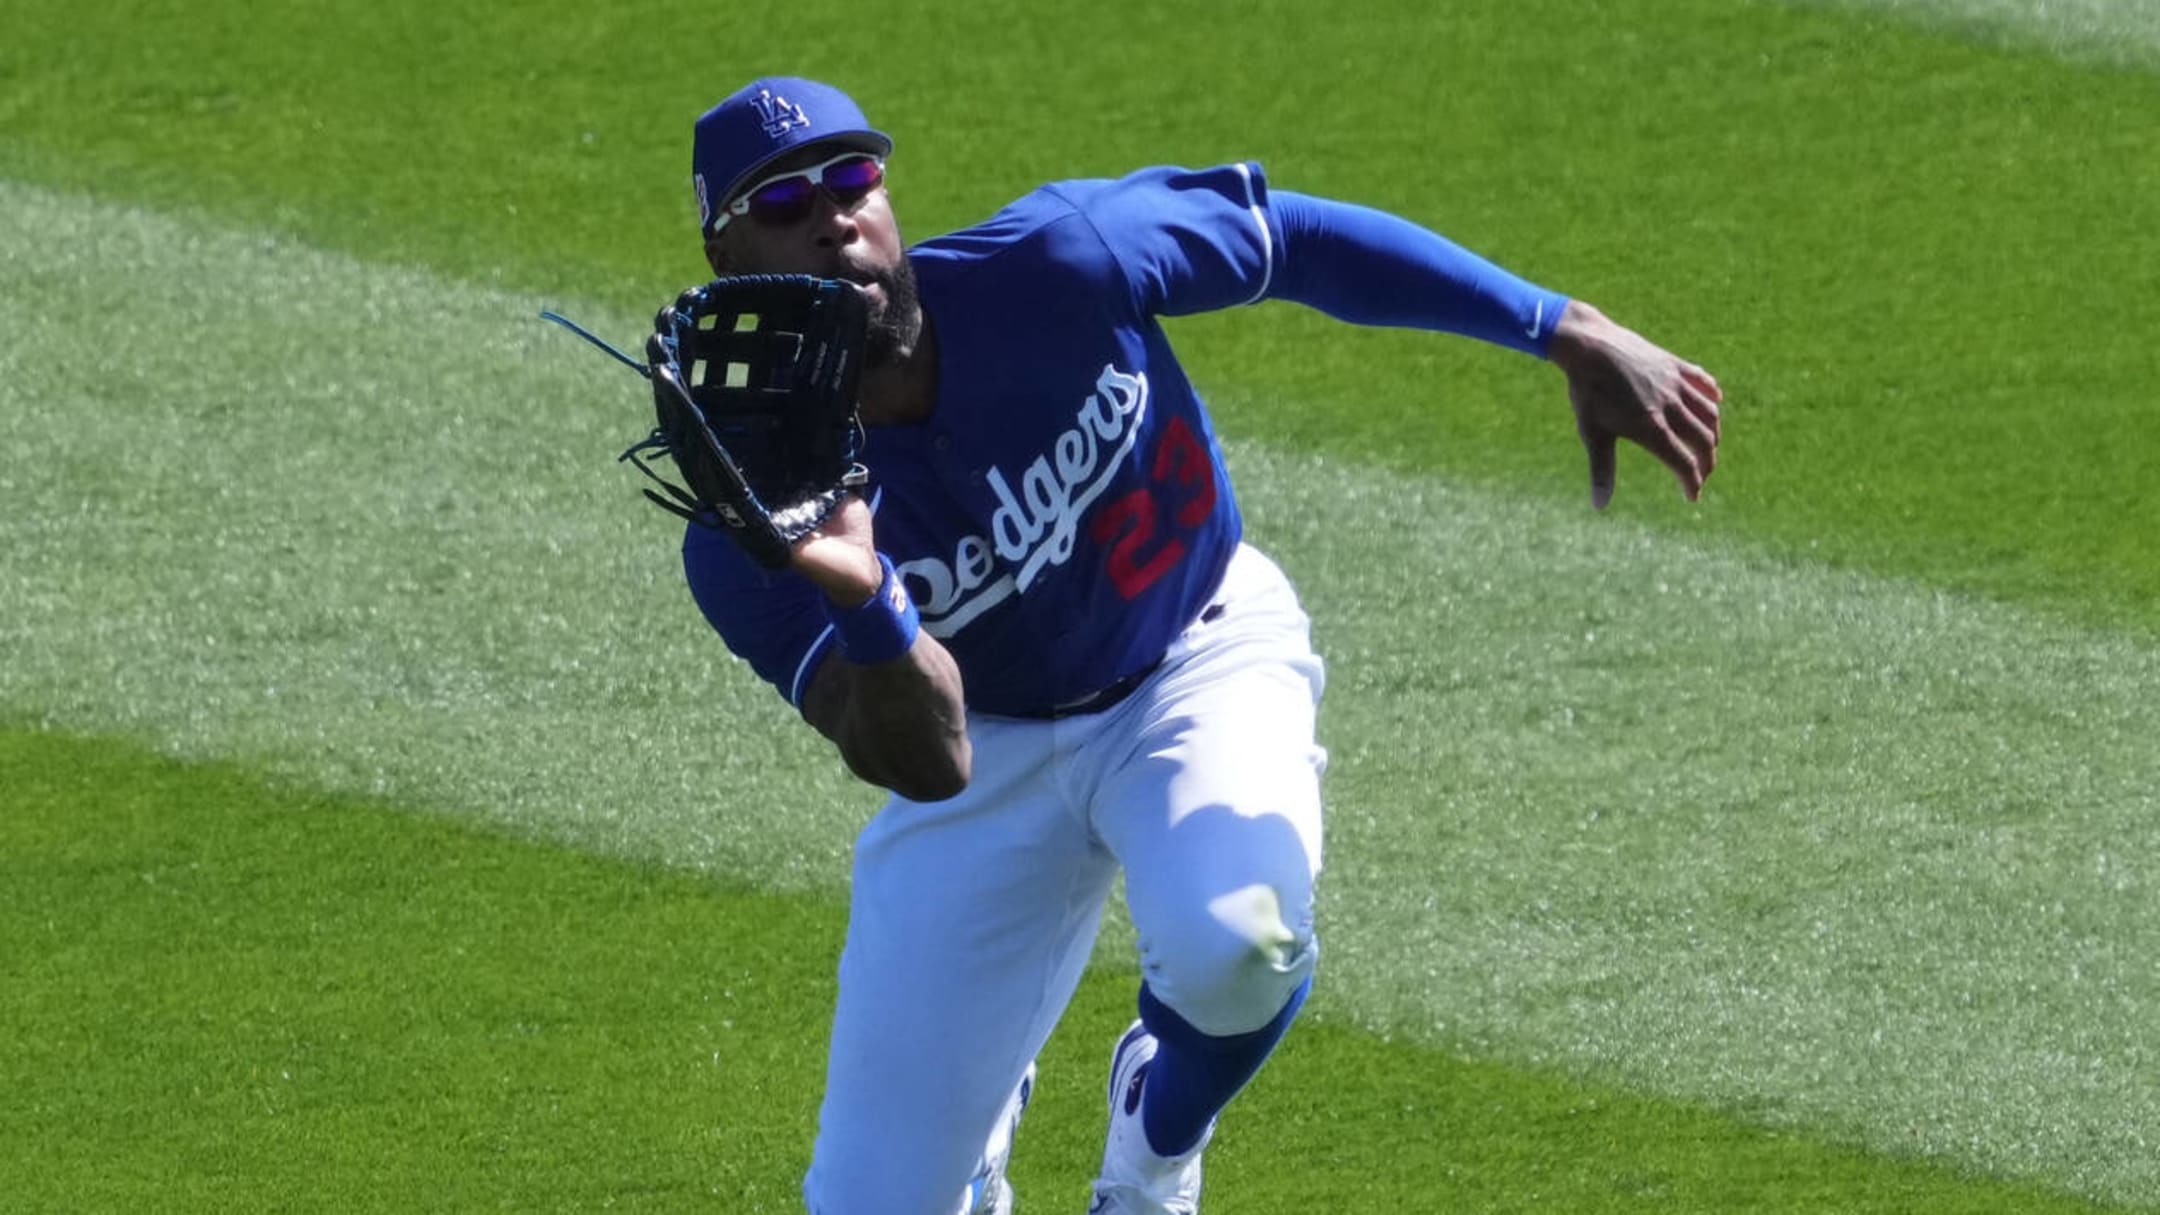 James Outman's strong spring making Dodgers' outfield picture